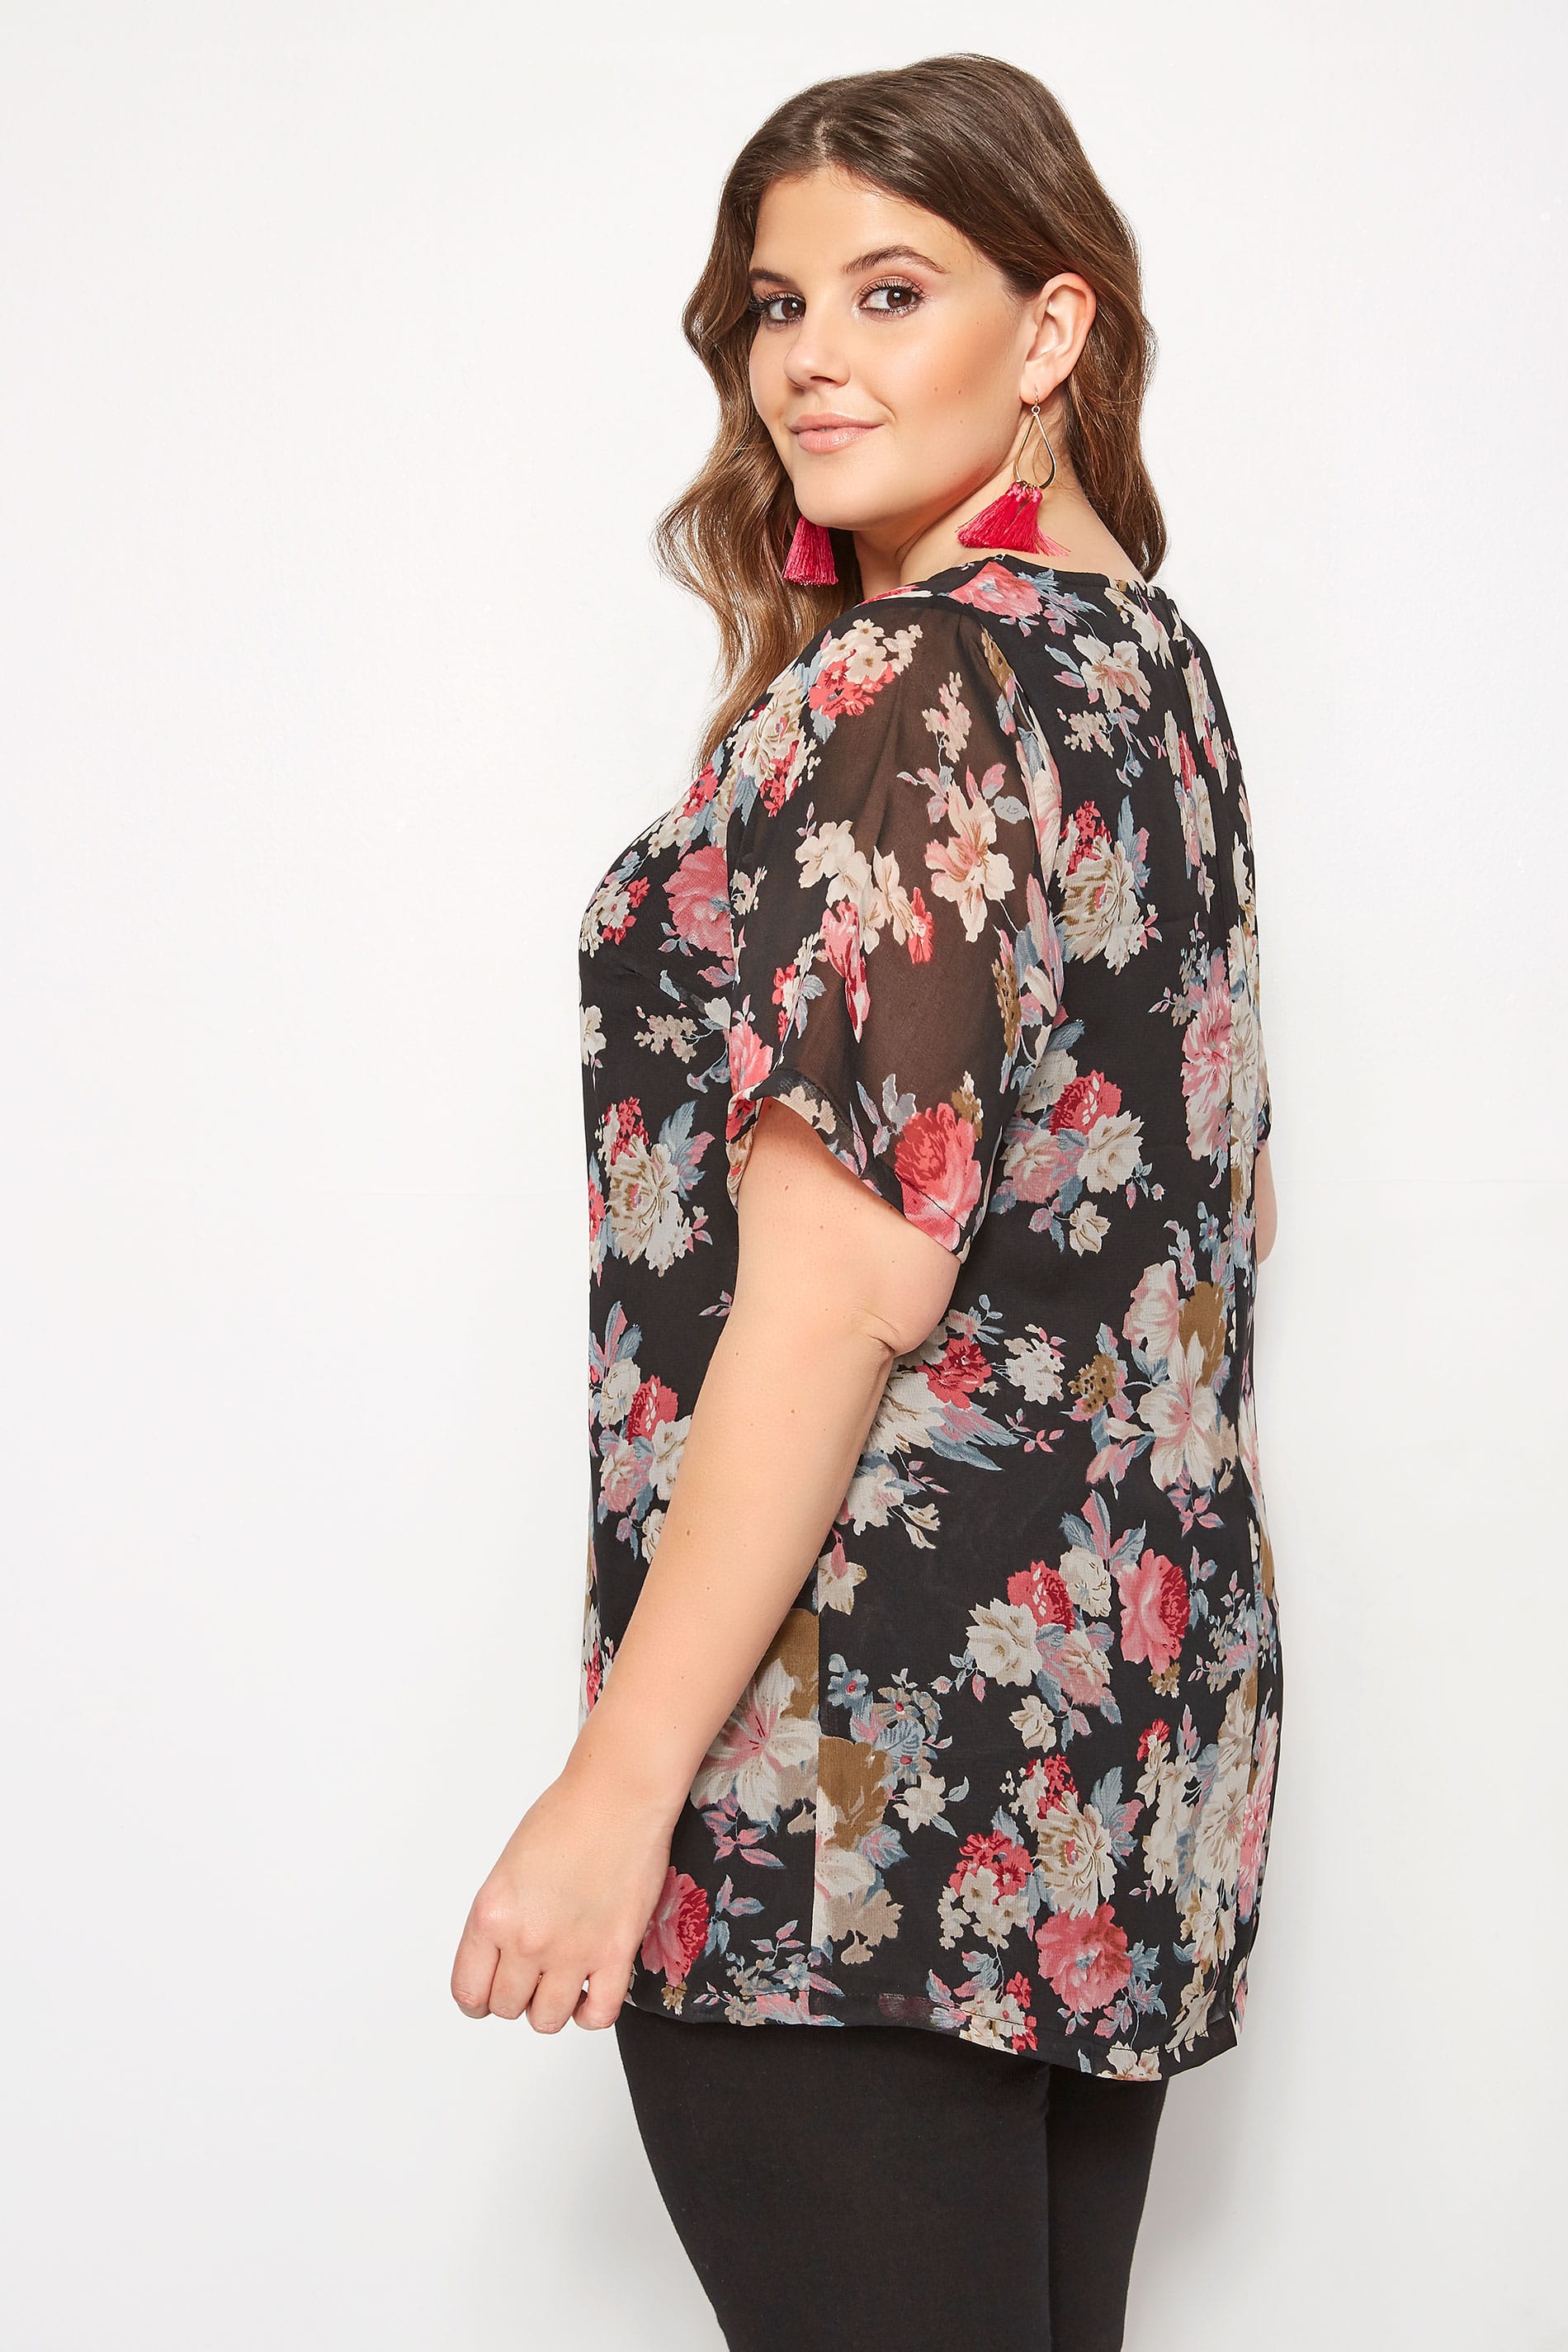 Plus Size Black Floral Chiffon Top | Sizes 16 to 32 | Yours Clothing